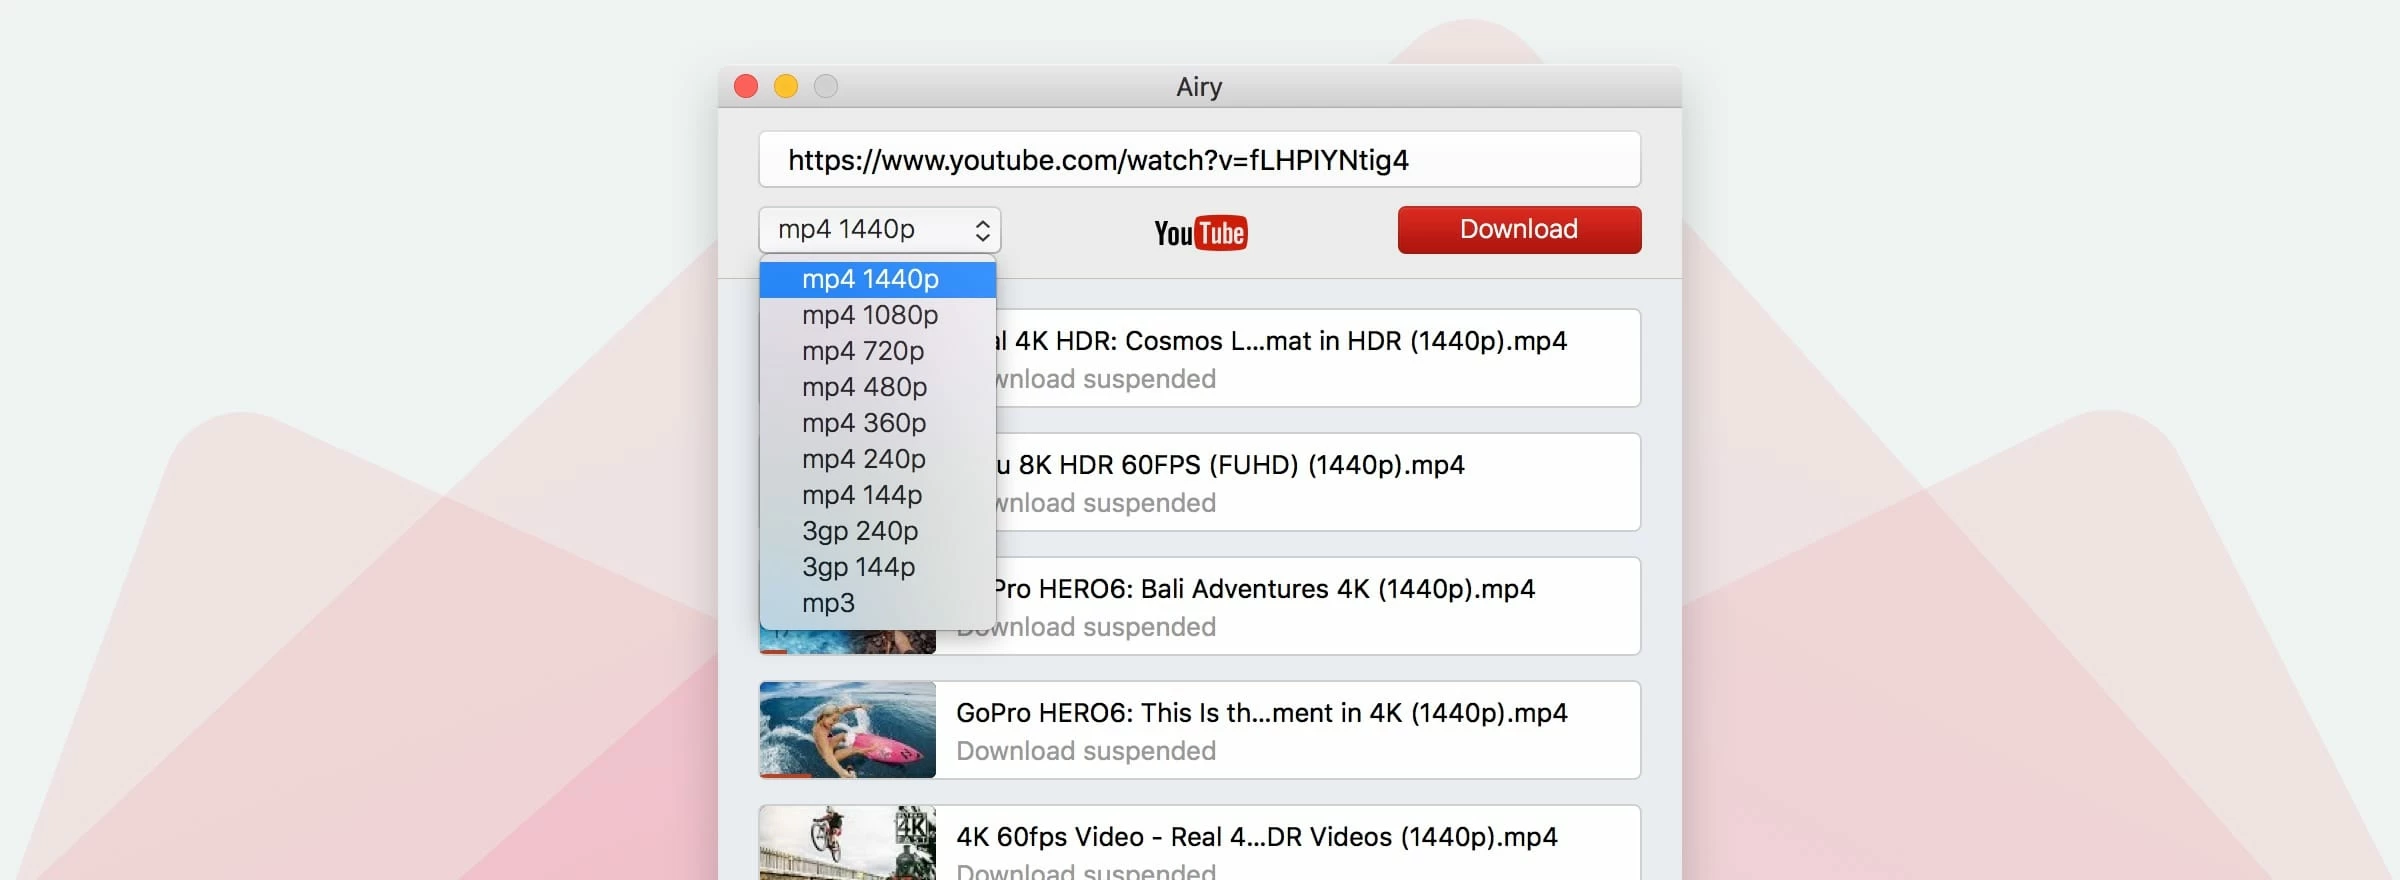 How To Download YouTube Videos On A Mac